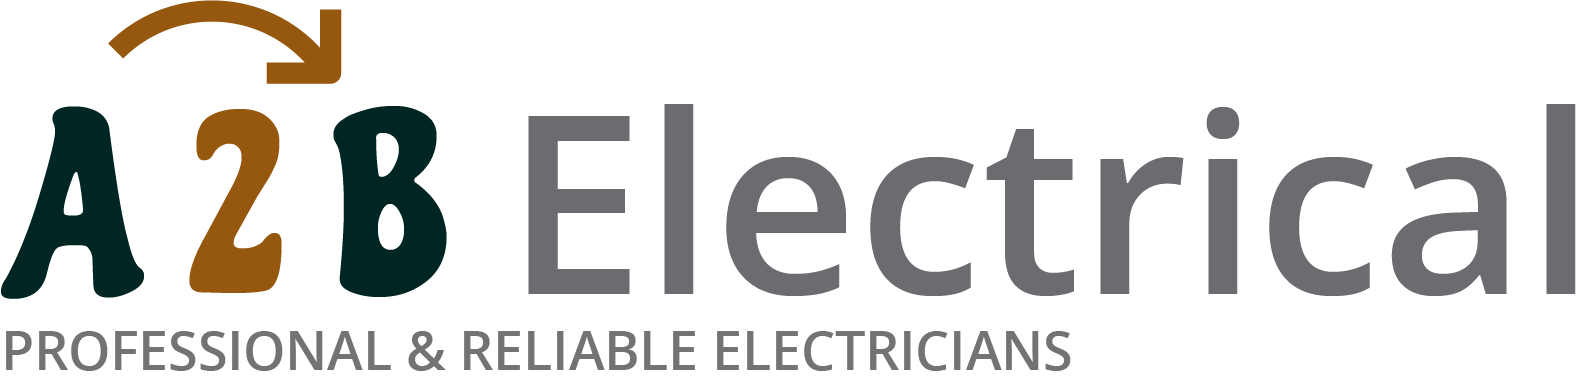 If you have electrical wiring problems in Wigan, we can provide an electrician to have a look for you. 